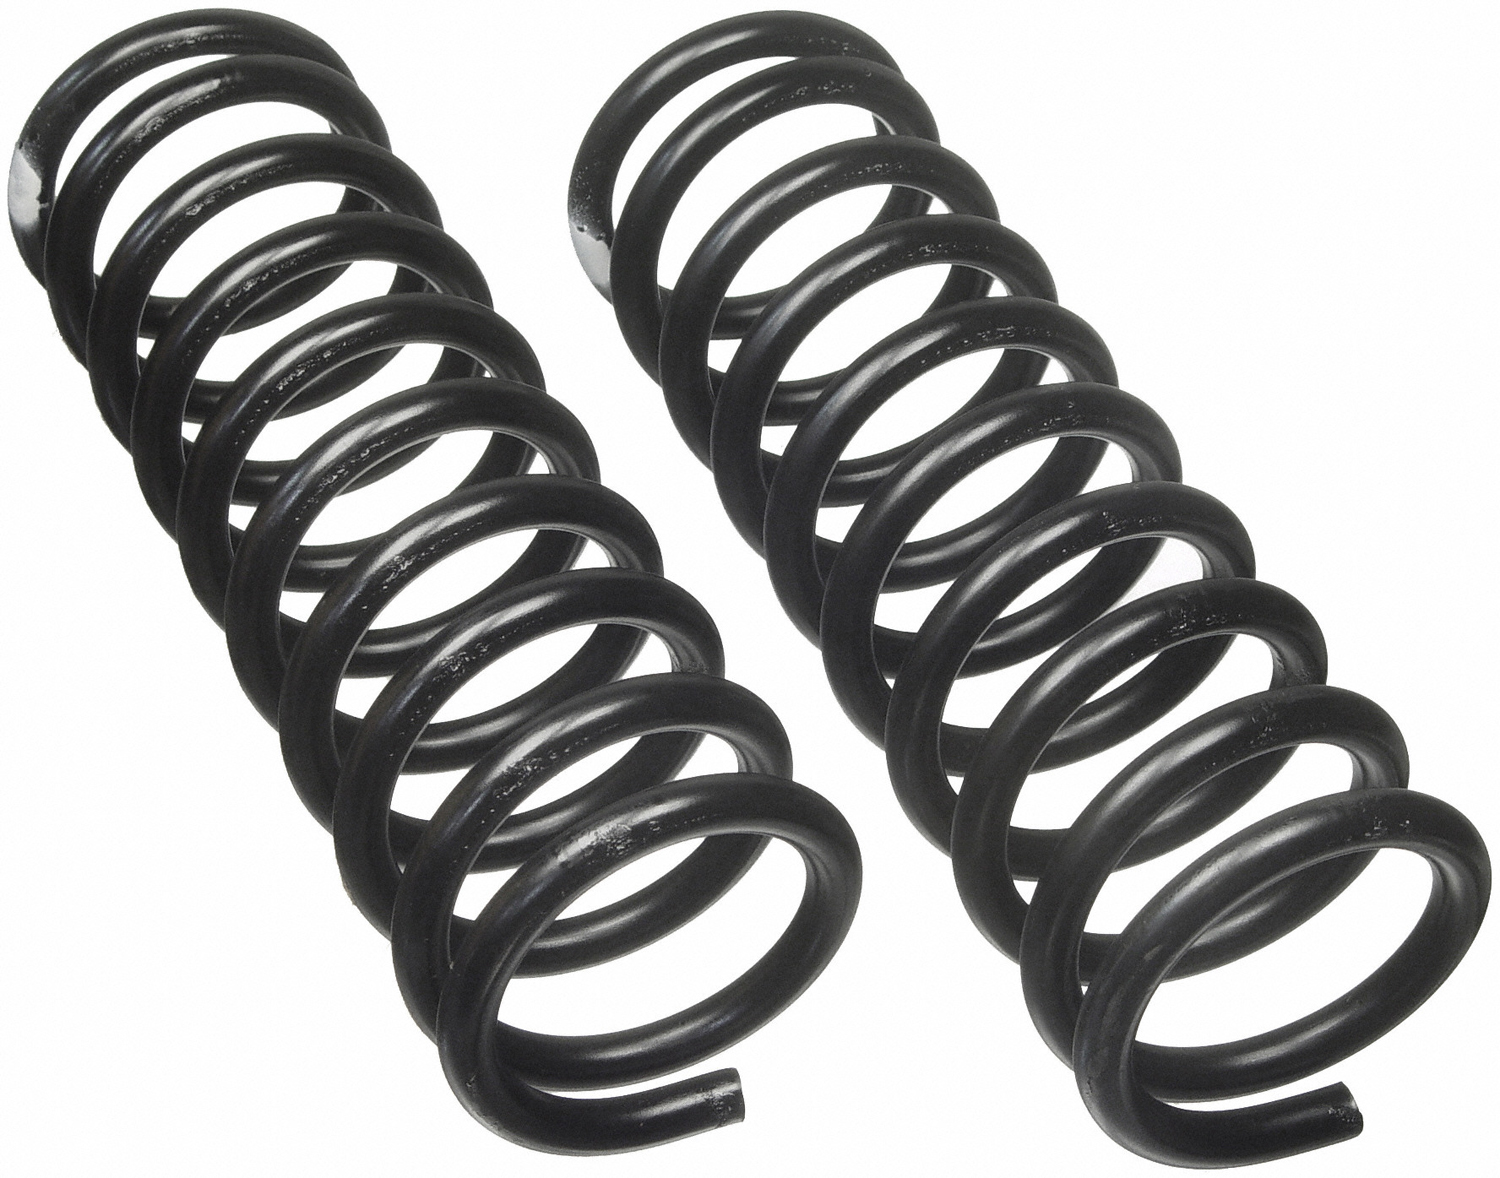 Image of ID 5402 Moog 5402 Coil Spring Set Fits 1984-1985 Buick LeSabre